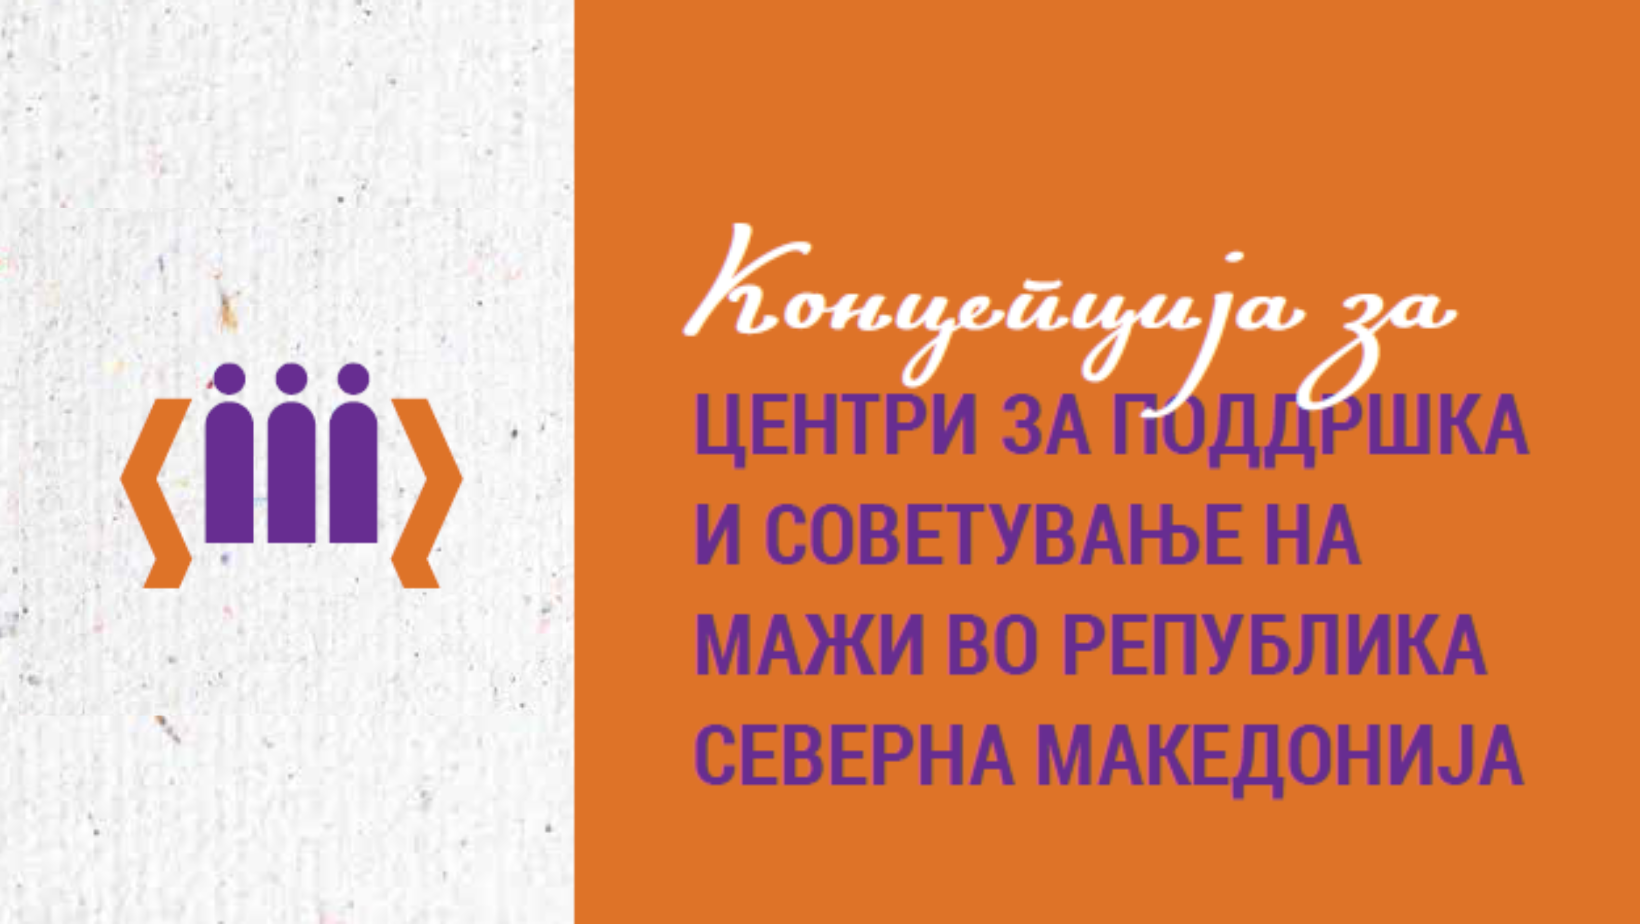 Concept on Men’s Counselling and Support Centers in the Republic of North Macedonia